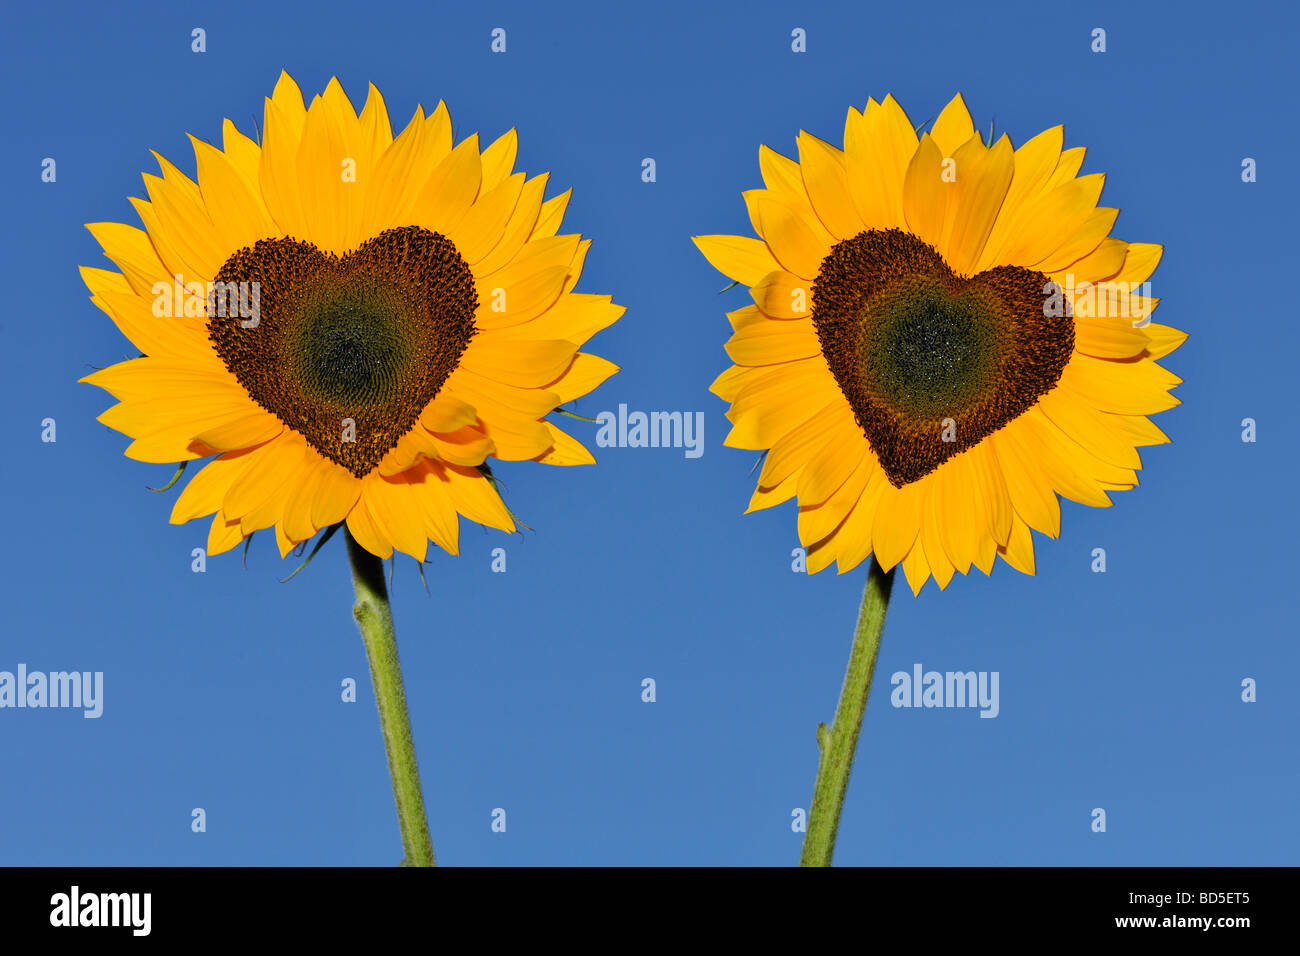 Sunflowers (Helianthus annuus) with tubular flowers in heart shape Stock Photo